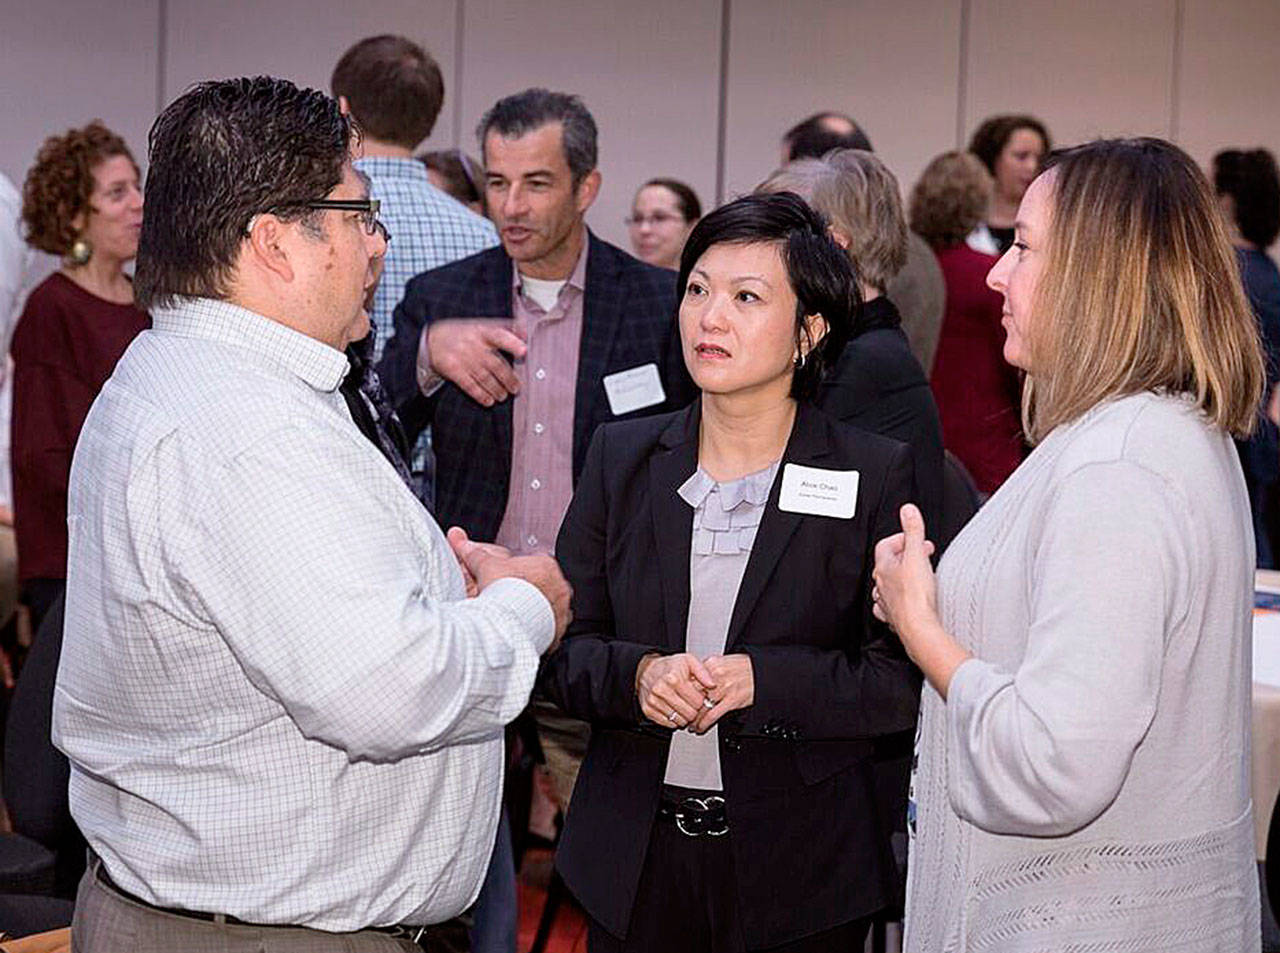 Community Transit’s Martin Munguia (left) and Kaiser Permanente’s Alice Chao (center) and the Community Foundation’s Karri Matau share thoughts. (William Wright)